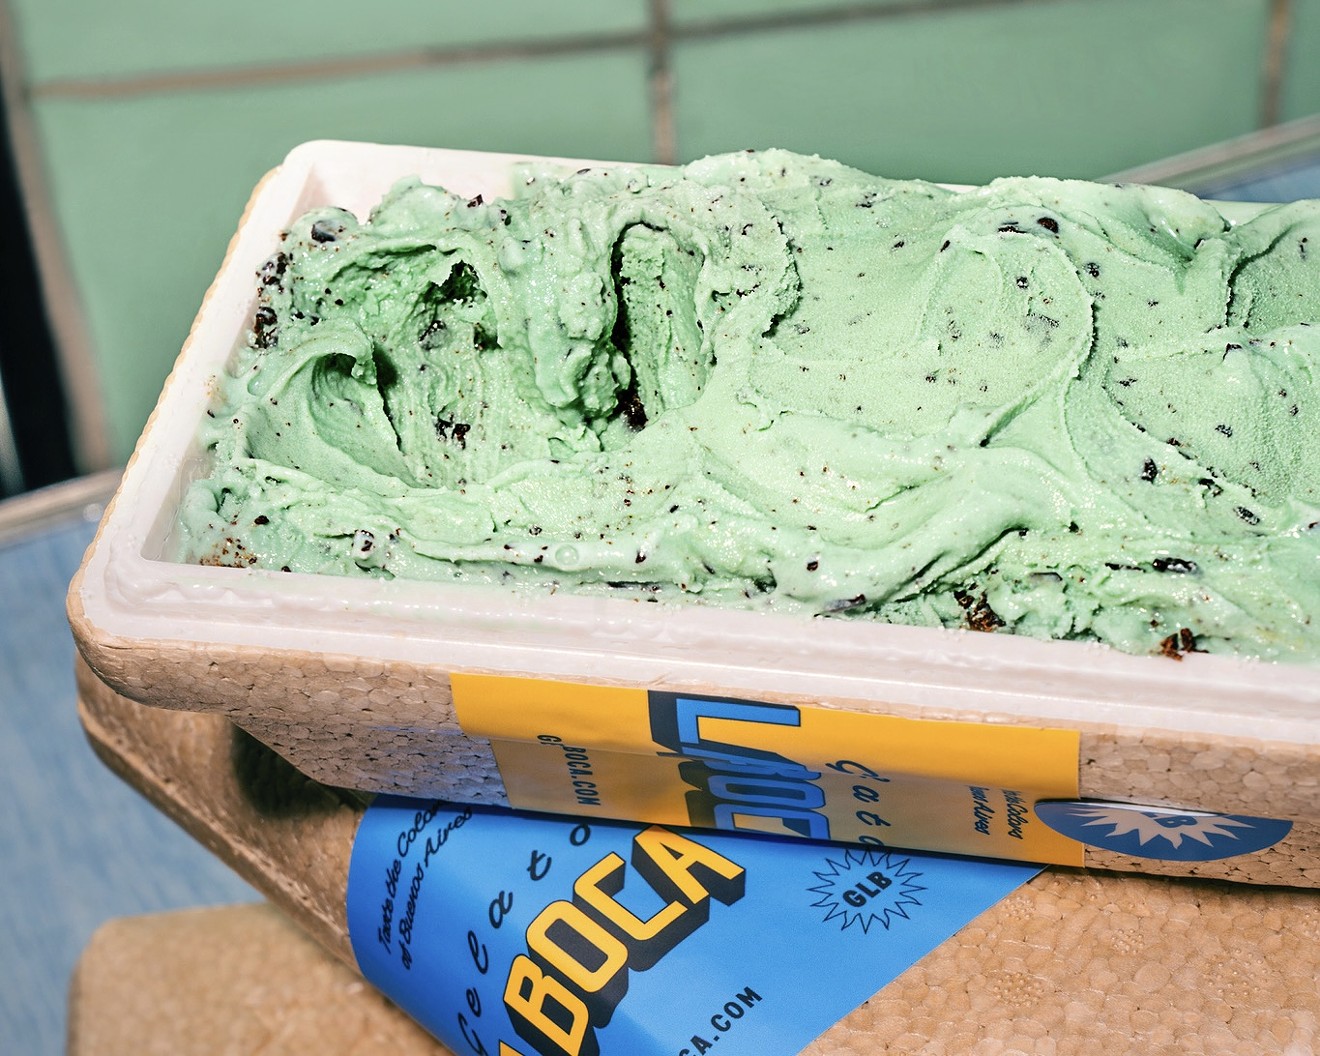 GLB's mint chip flavor is speckled with Belgian chocolate flakes.